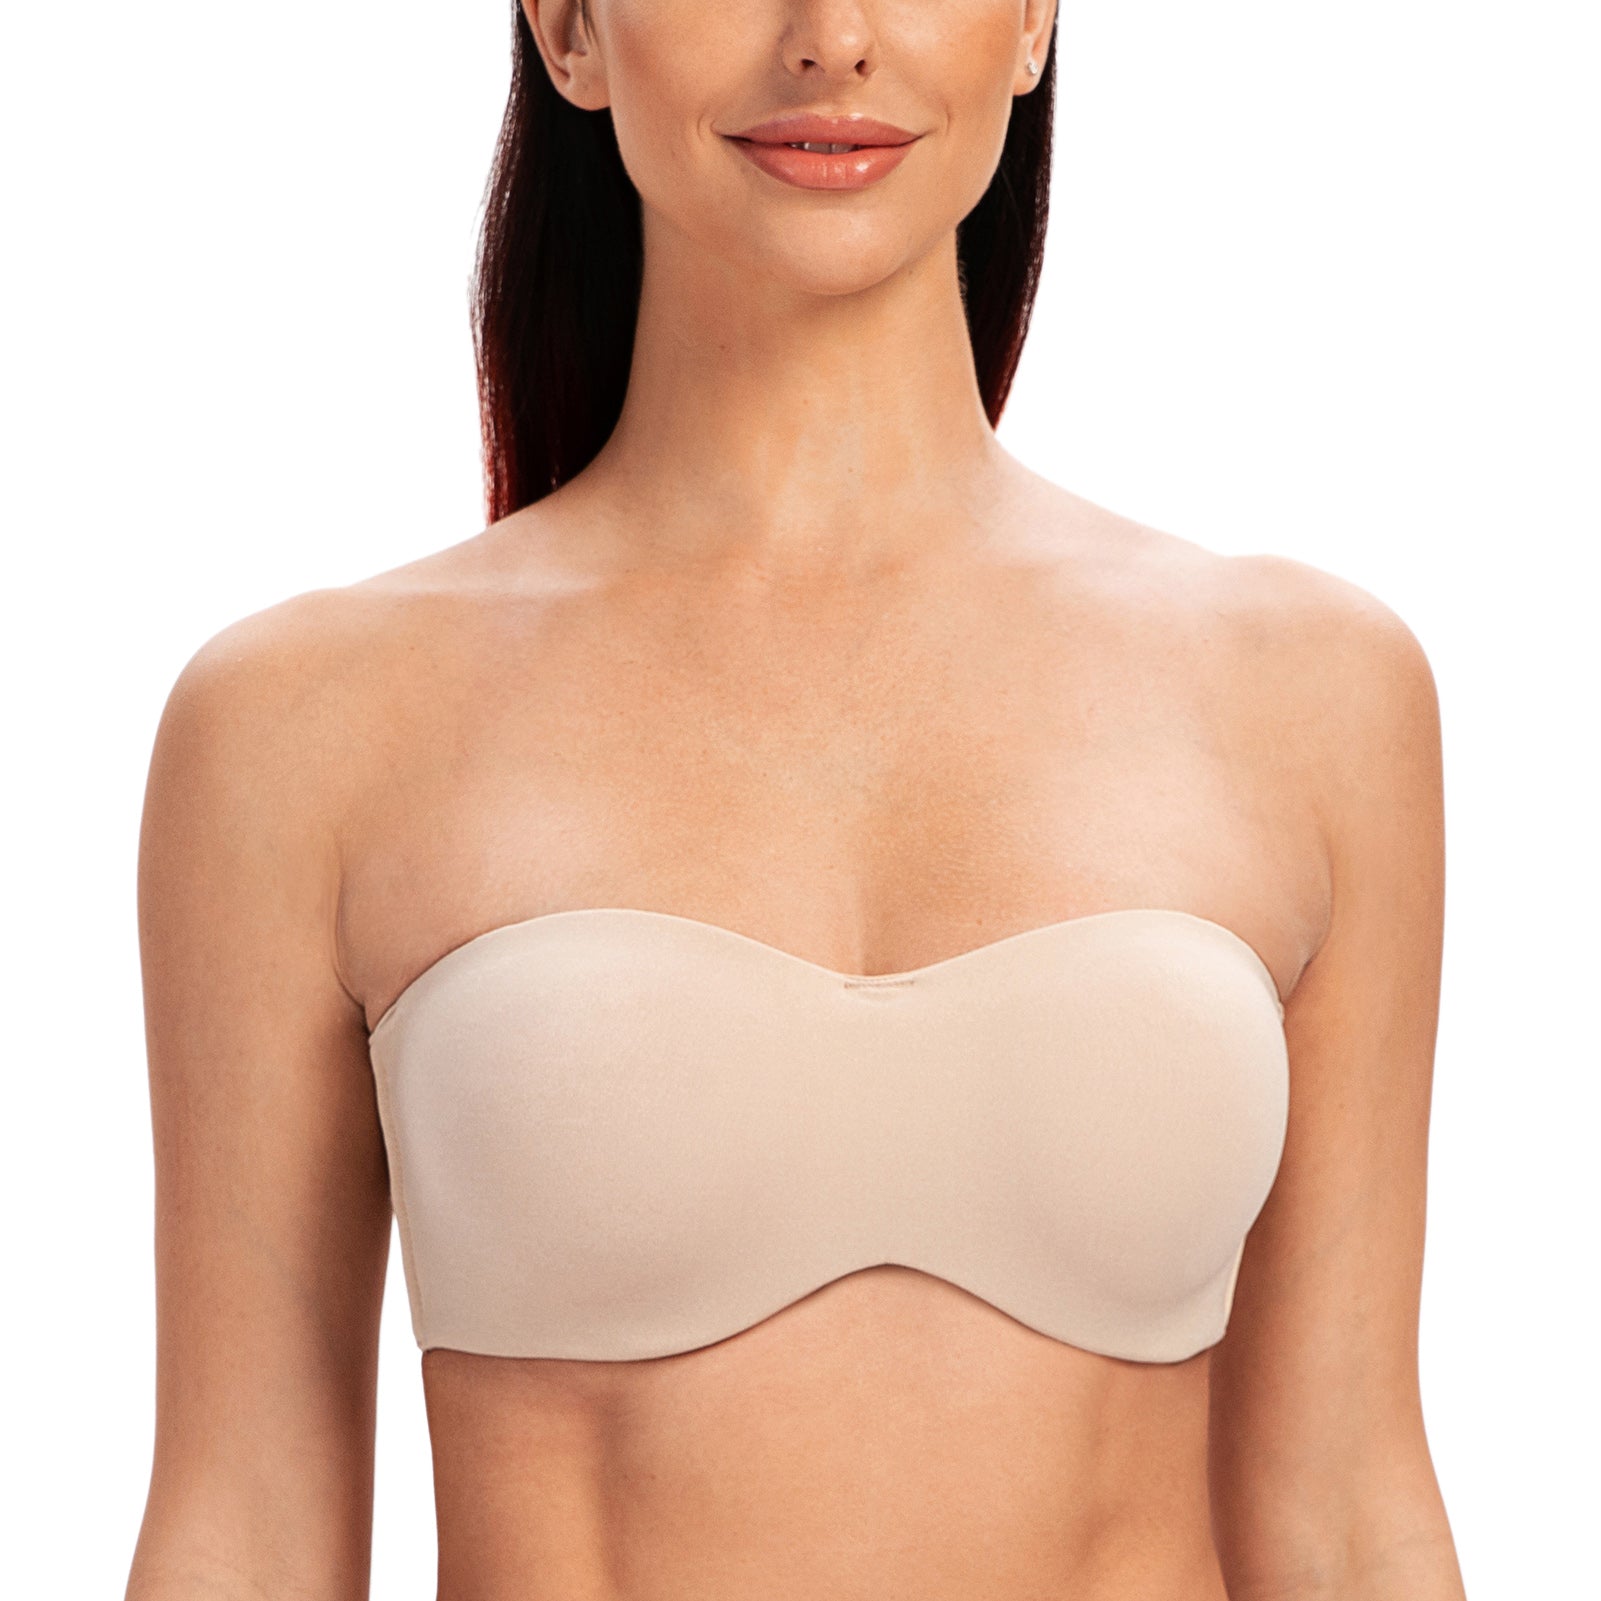  Womens Strapless Bra Unlined Underwire Minimizer Plus Size  Support Coconut White 34G